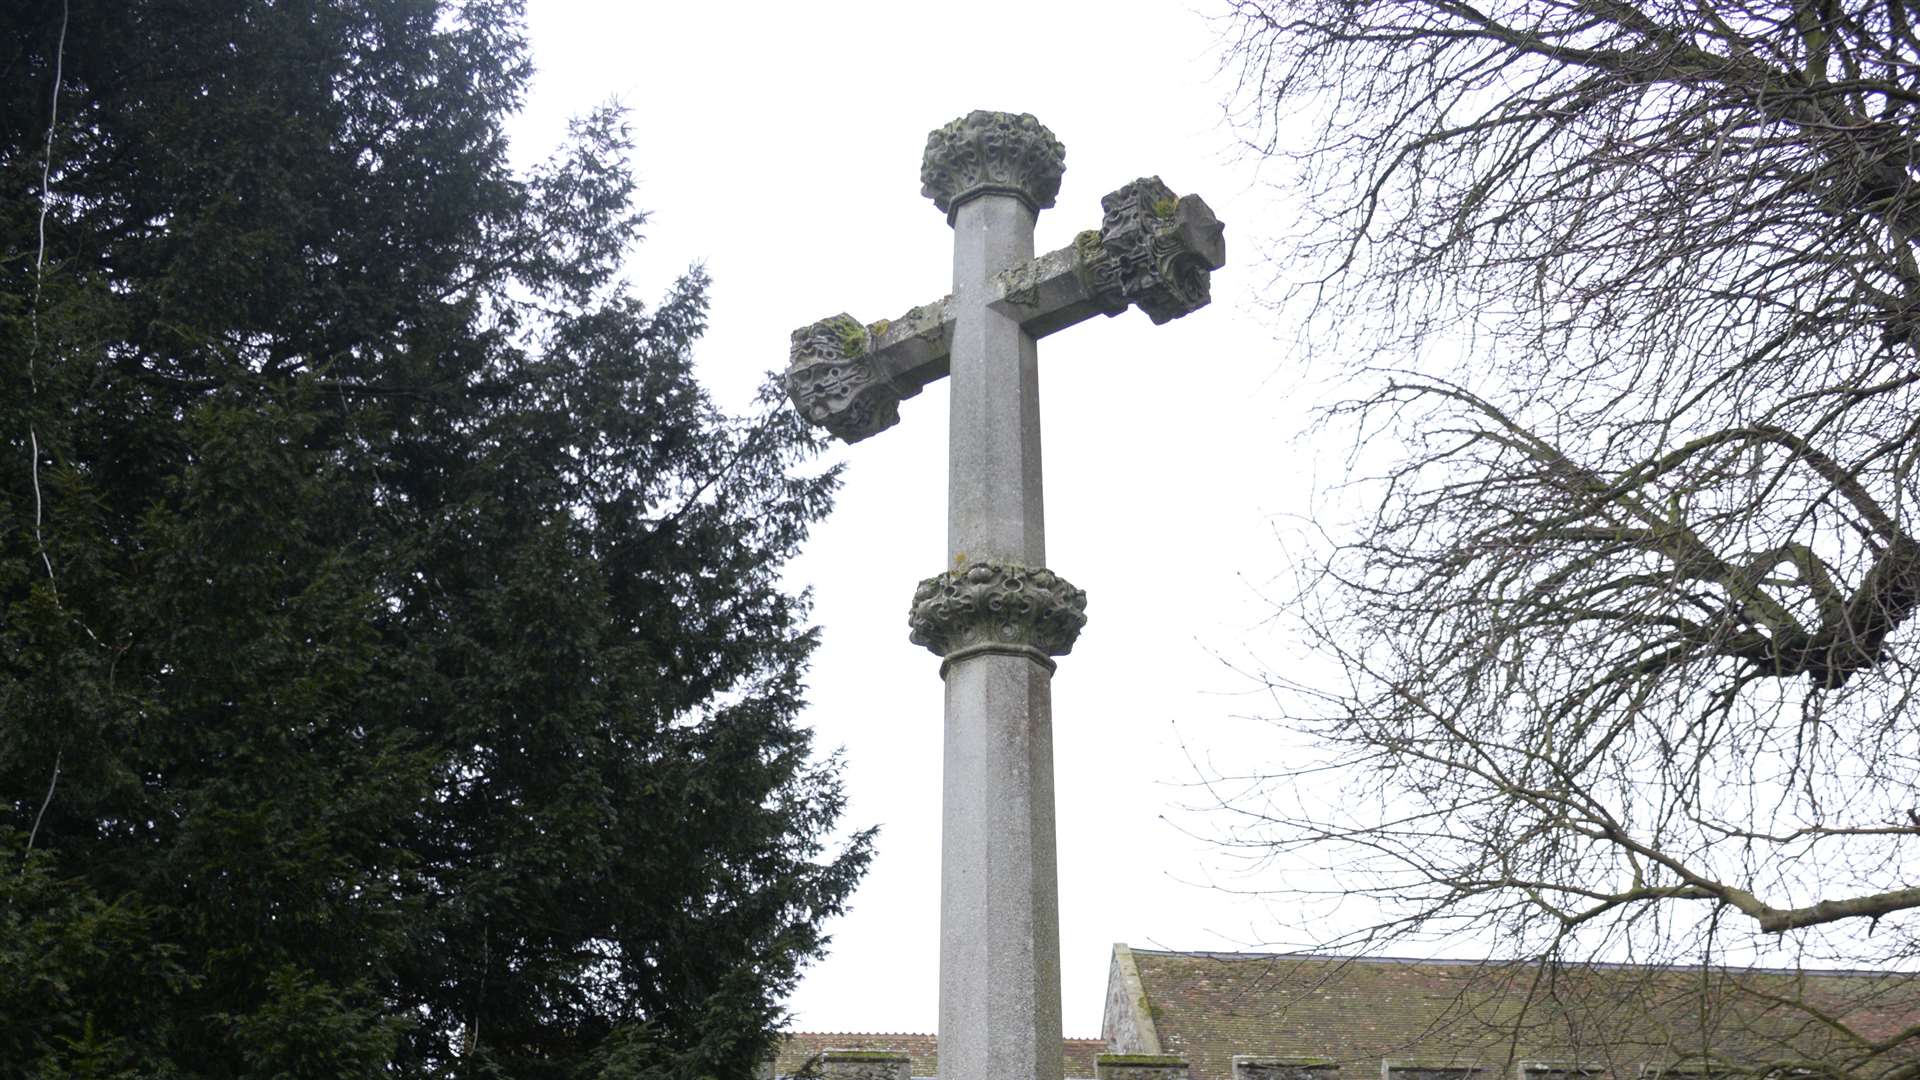 The war memorial at St Martin's Church in Herne